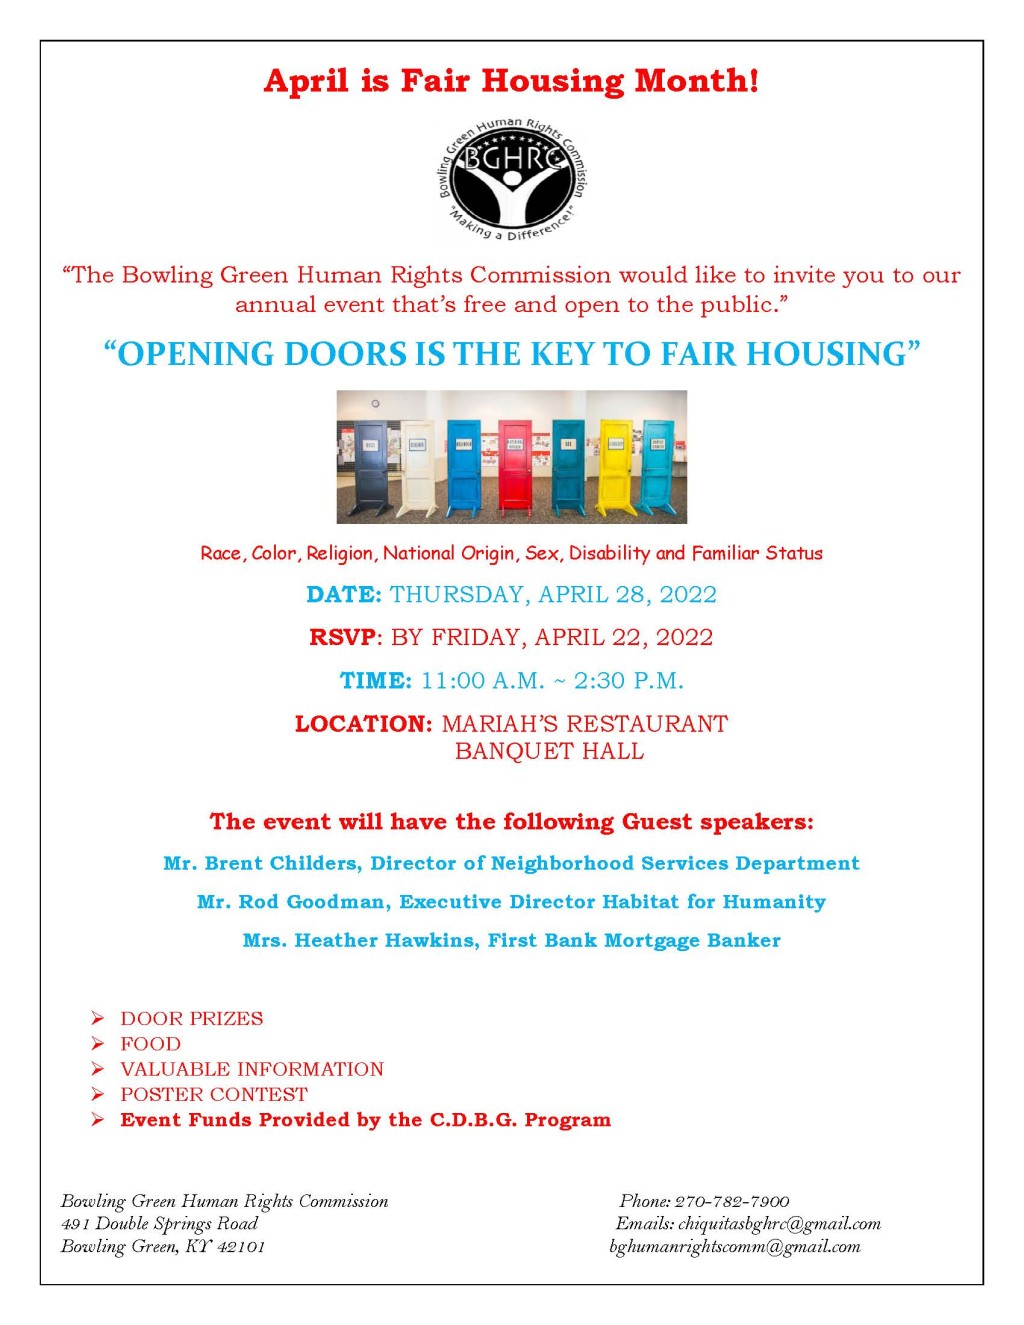 Bowling Green Human Rights - April is Fair Housing Month